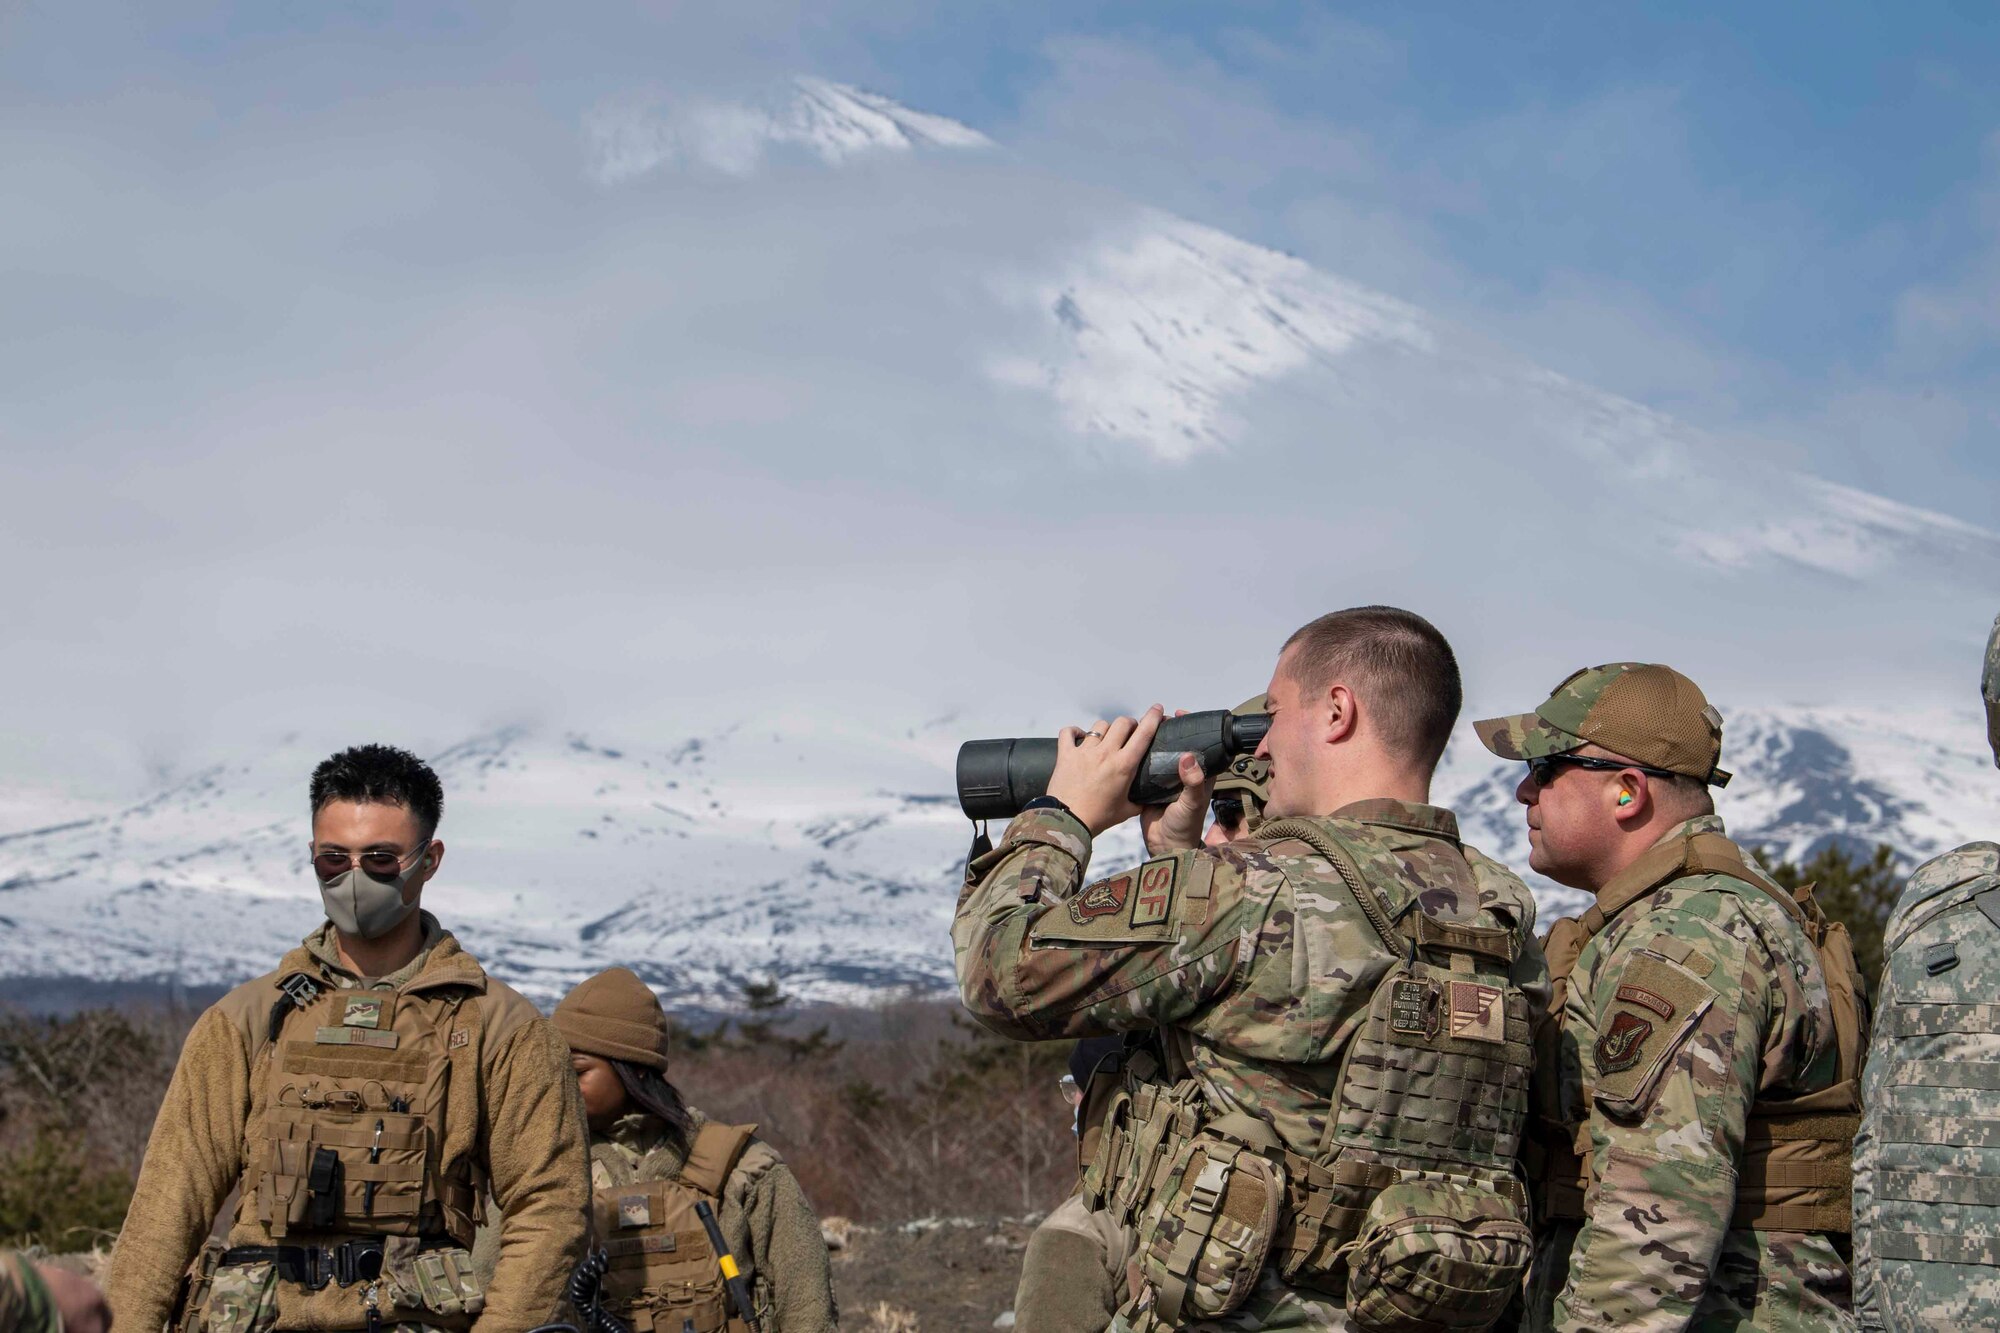 Capt. James Hughes, 374th Security Forces Squadron director of operations, and Col. Patrick Launey, 374th Mission Support Group commander, check targets prior to an M240 and M249 machine guns qualification at Combined Arms Training Center Camp Fuji, Japan, March 10, 2022.